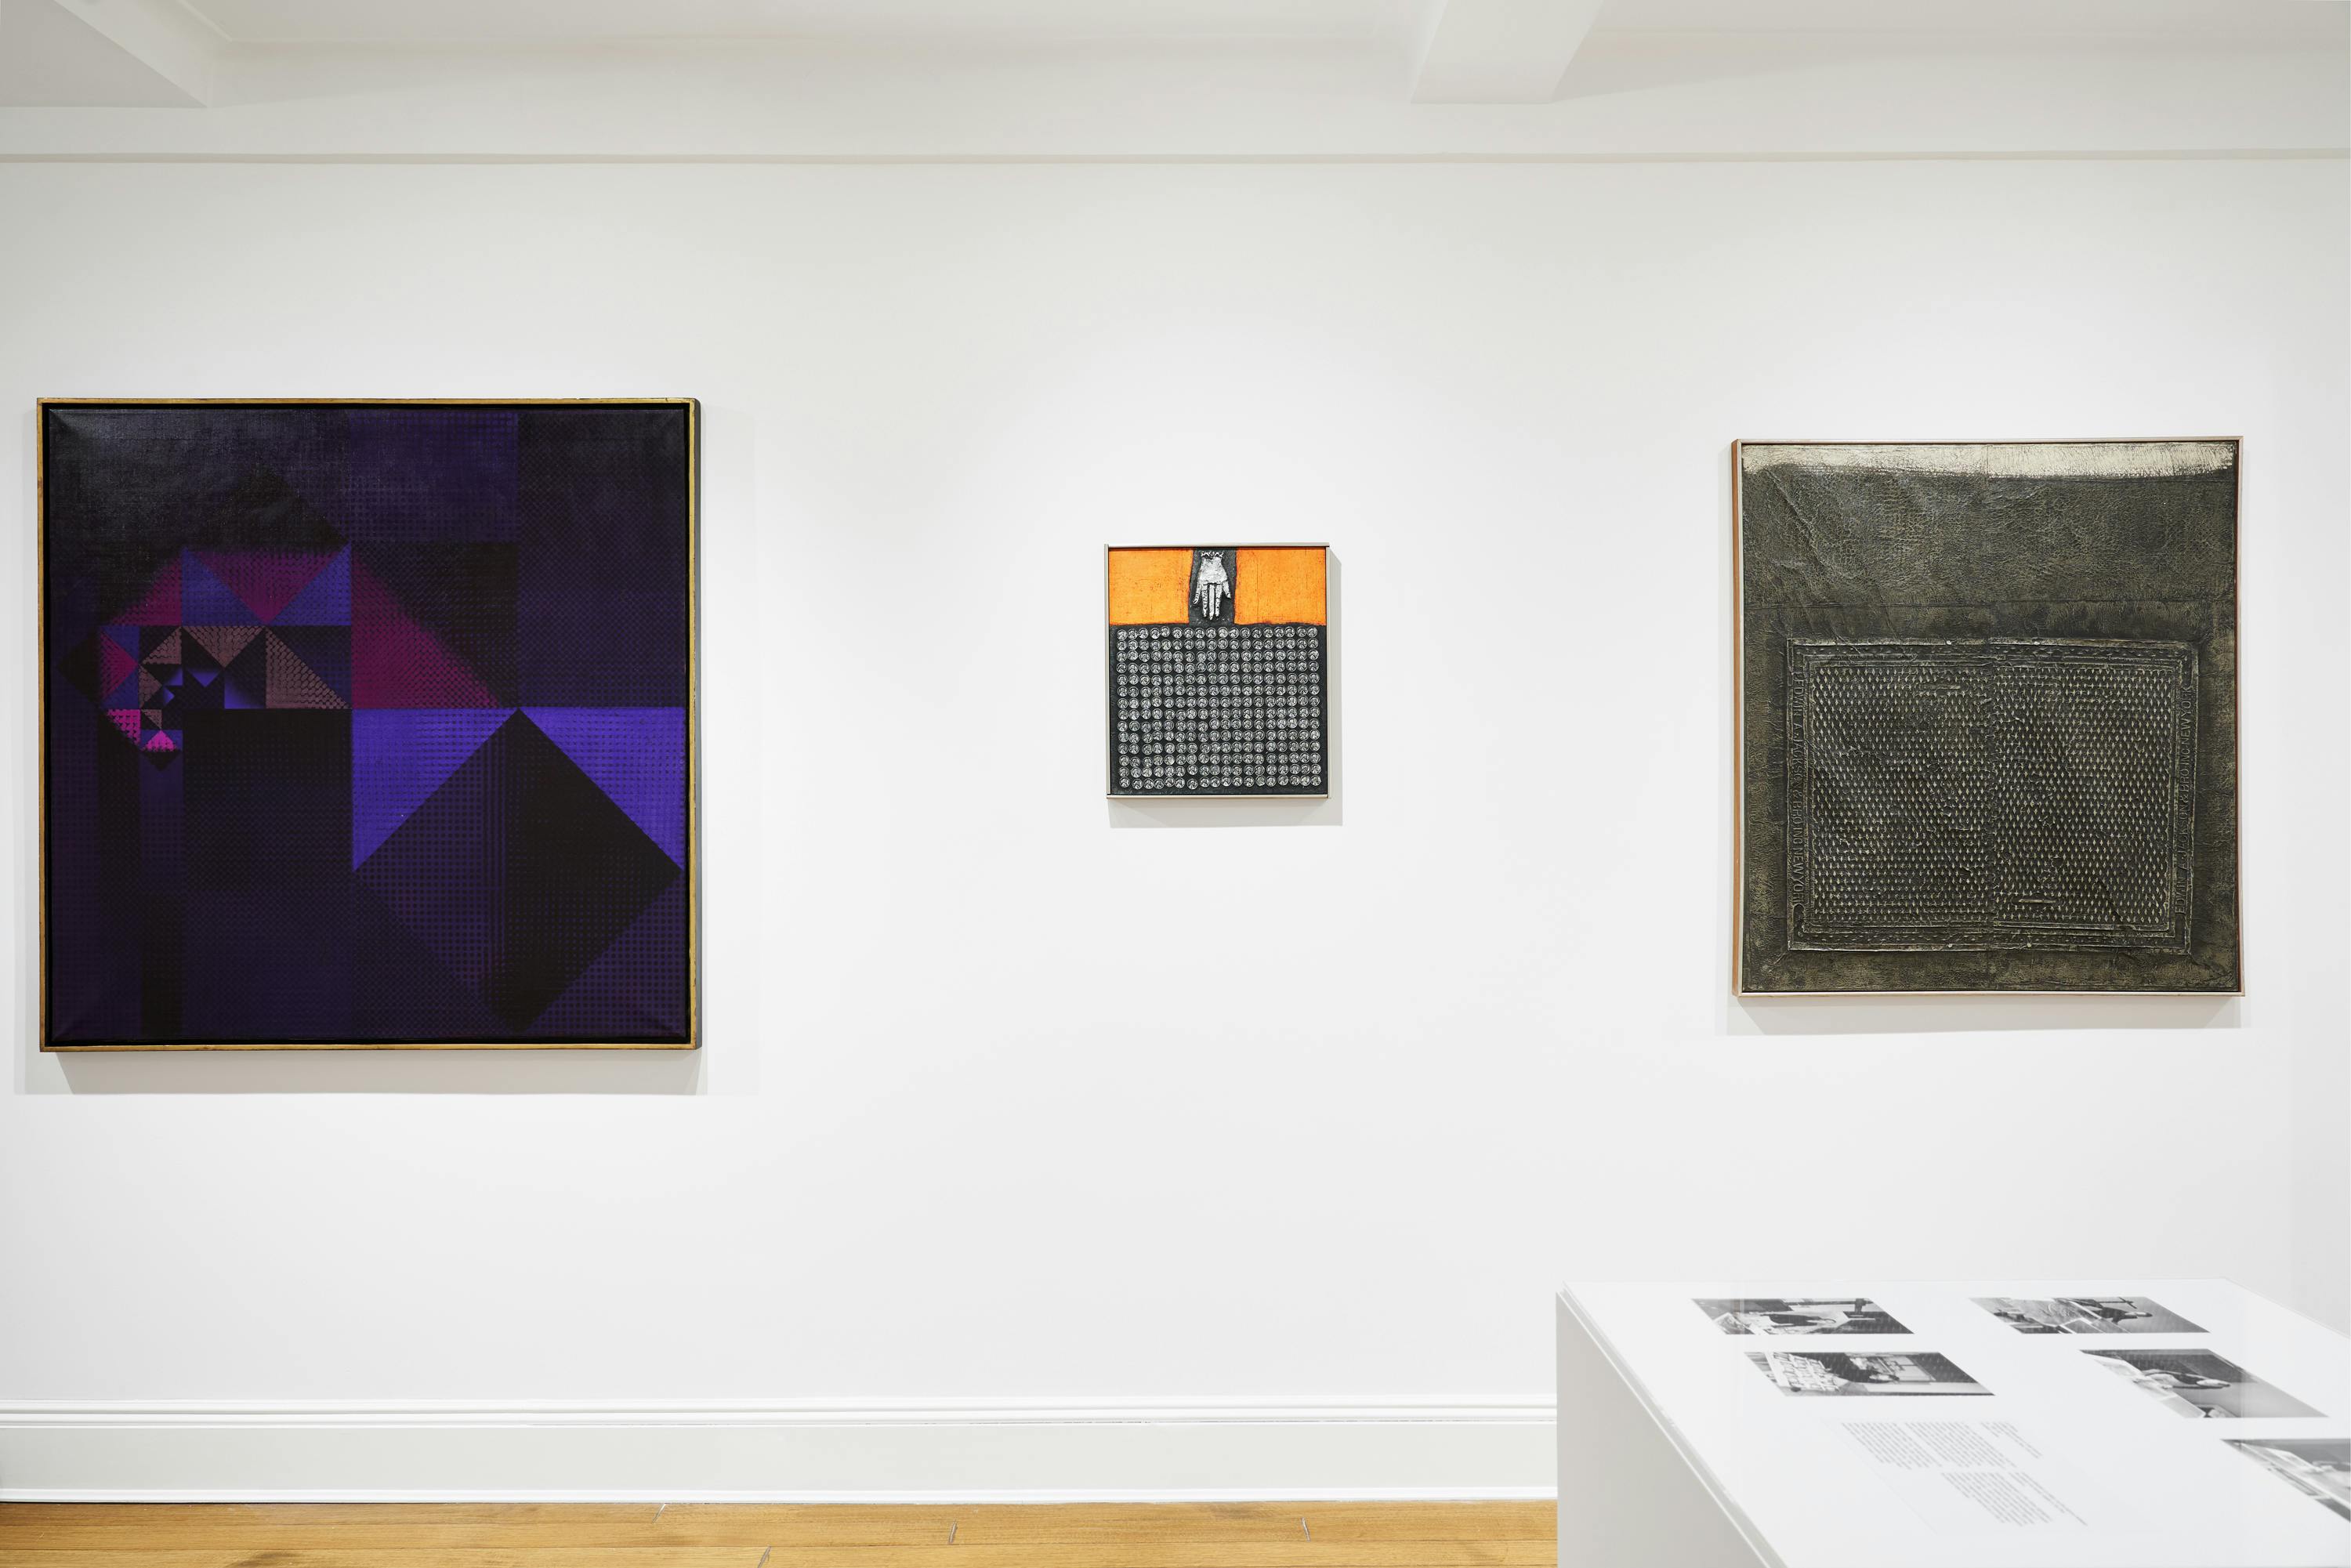 Installation view of a vitrine, two aluminum foil works and one painting by José Antonio Fernández-Muro.